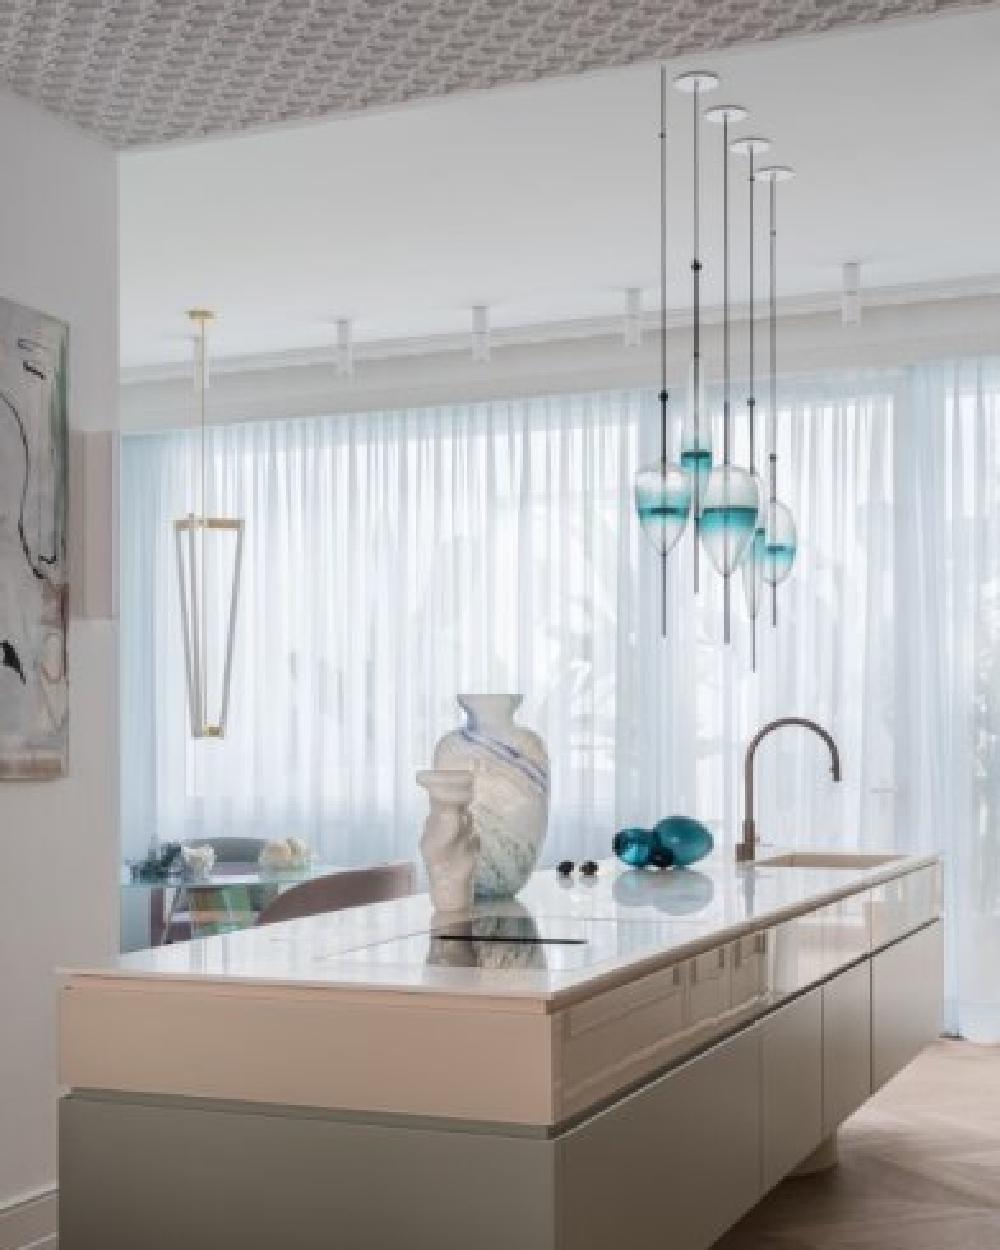 FLOW[T] S4 Pendant lamp in Turquoise by Nao Tamura for Wonderglass For Sale 1